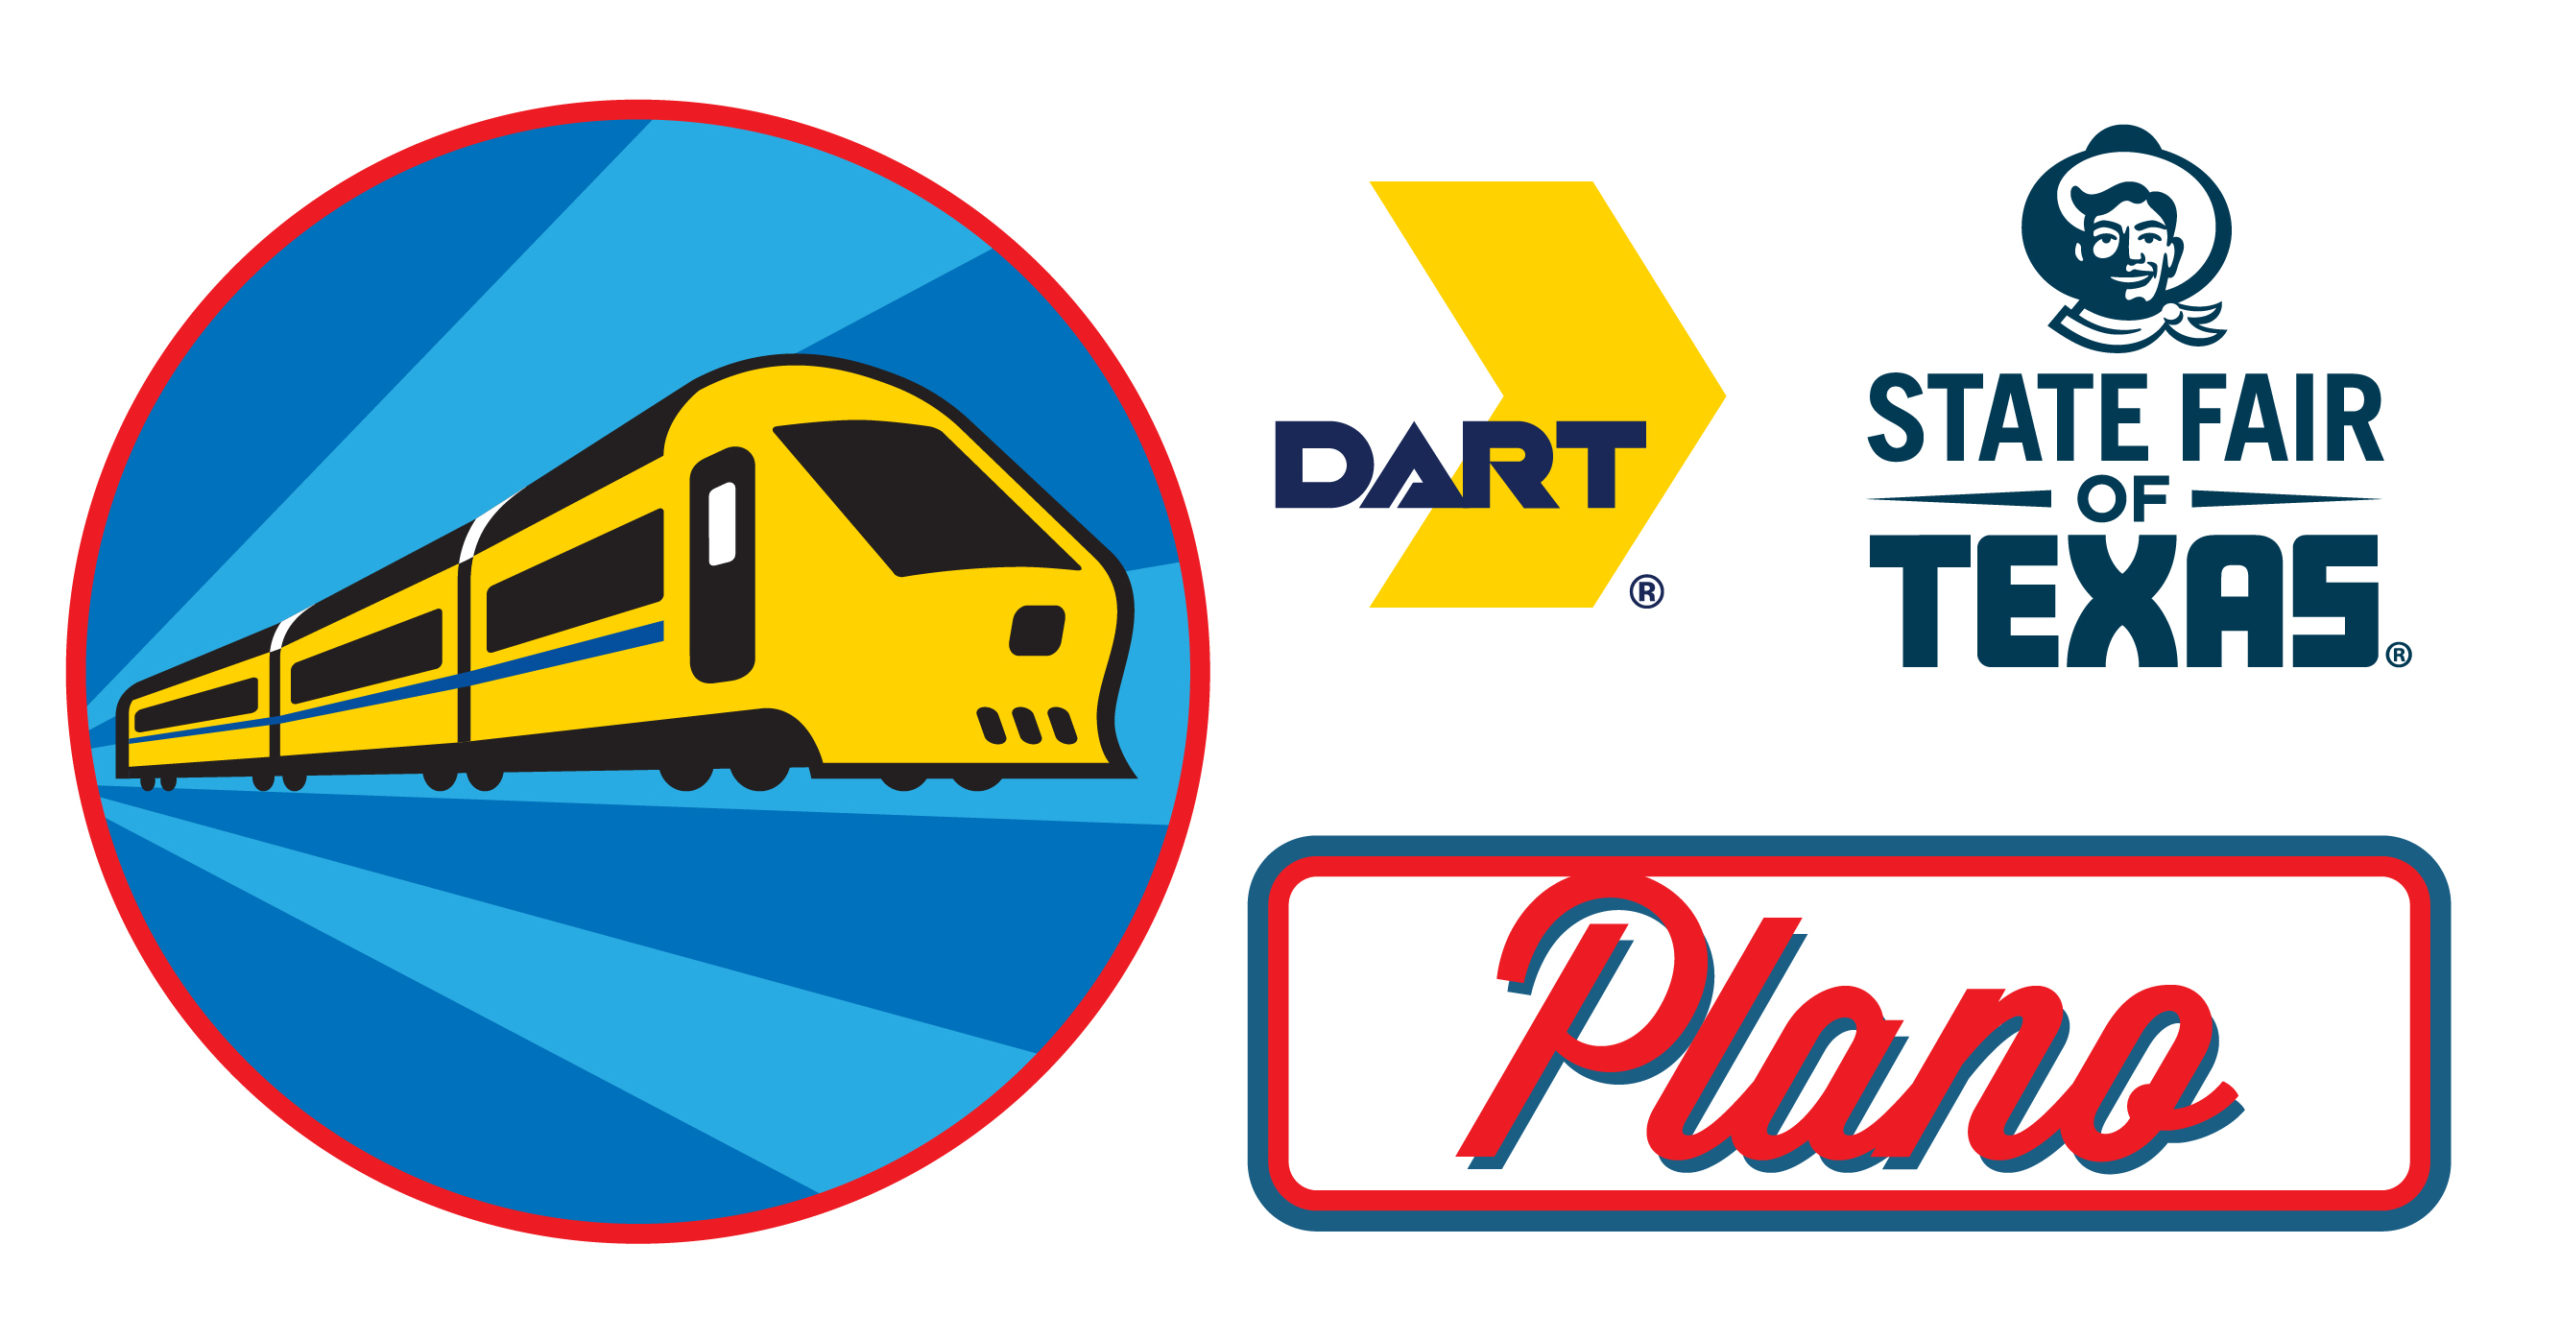 DART promo for State Fair of Texas